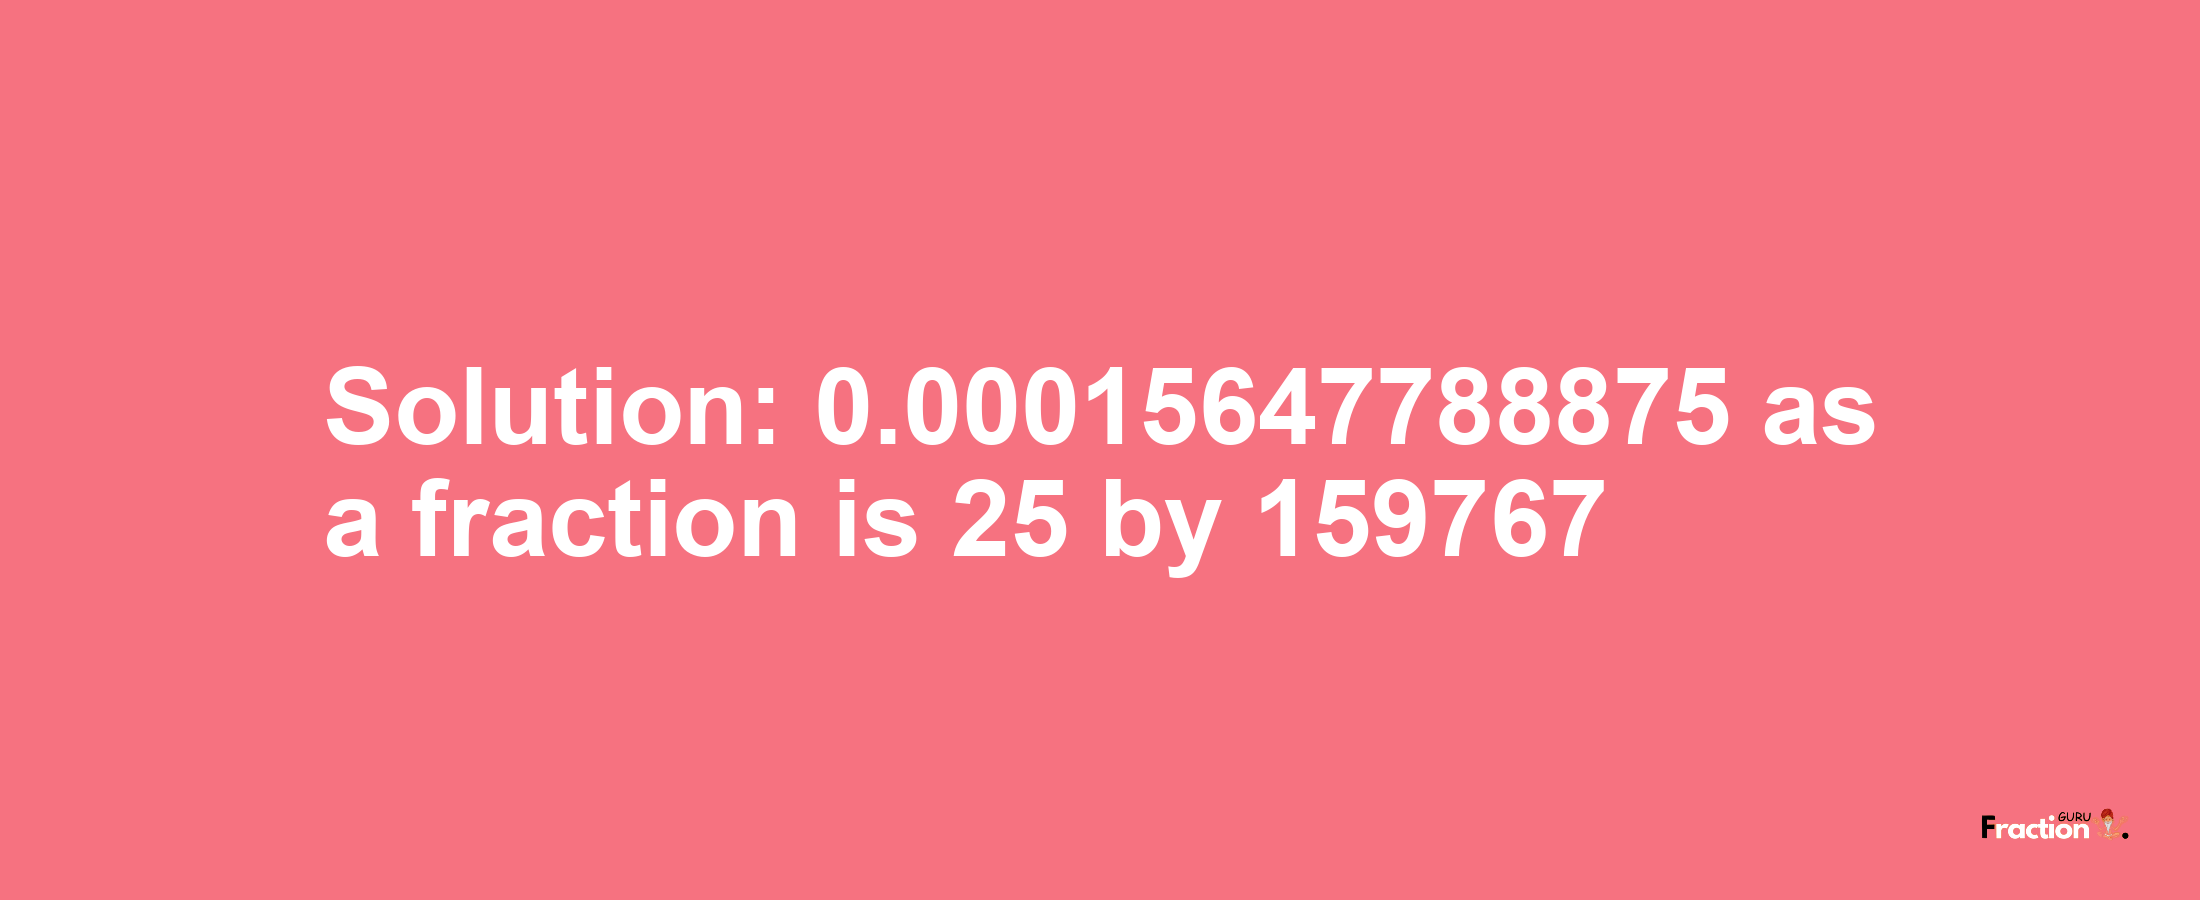 Solution:0.00015647788875 as a fraction is 25/159767